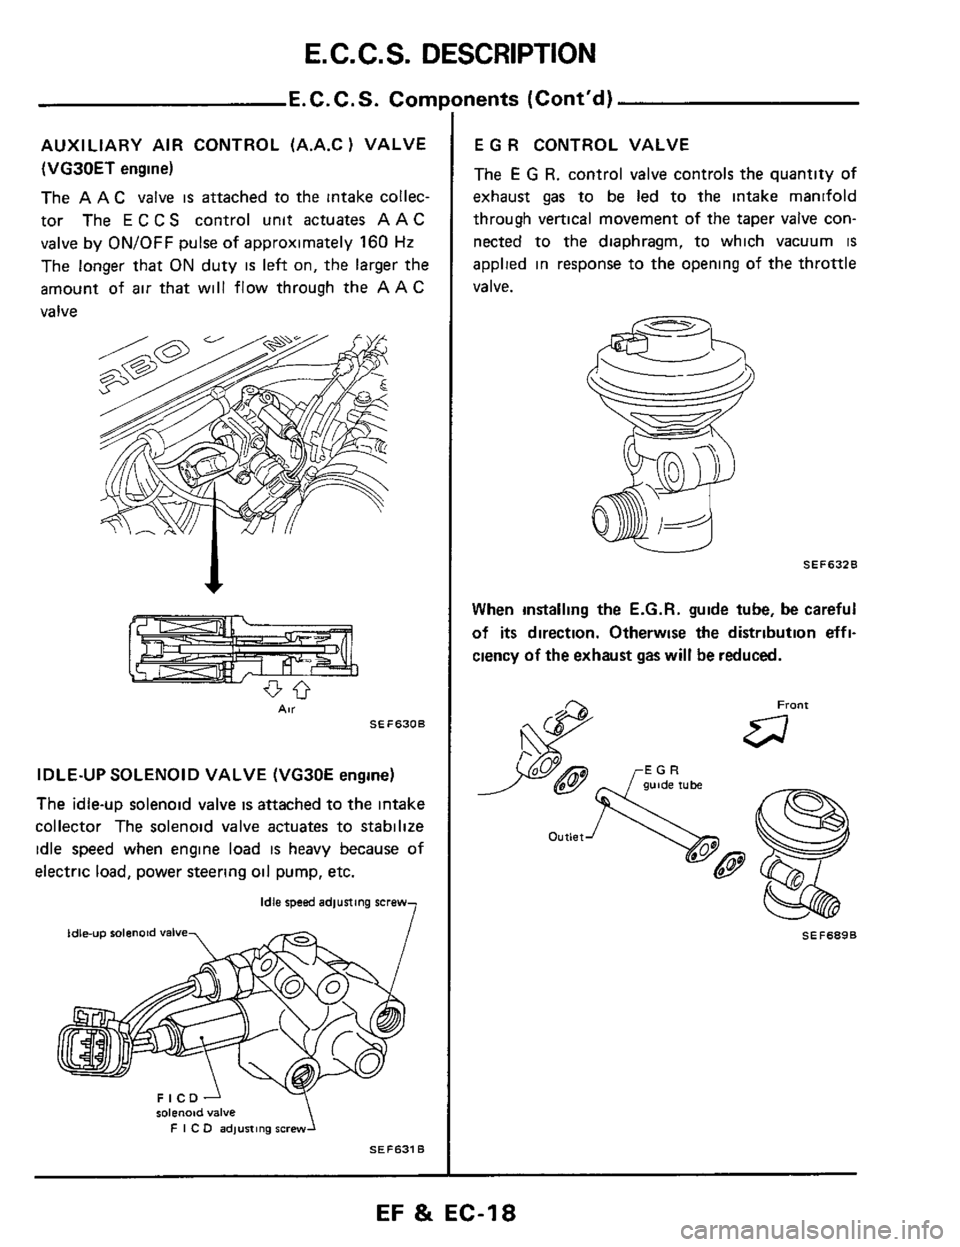 NISSAN 300ZX 1984 Z31 Engine Fuel And Emission Control System Workshop Manual E. C.  C. S. DESCRIPTION 
E.C.C.S.  Corn1 
AUXILIARY  AIR CONTROL  (A.A.C 1 VALVE 
(VG30ET 
engine) 
The 
A A C valve is attached  to the  intake  collec- 
tor  The E C CS control  unit actuates AAC 
